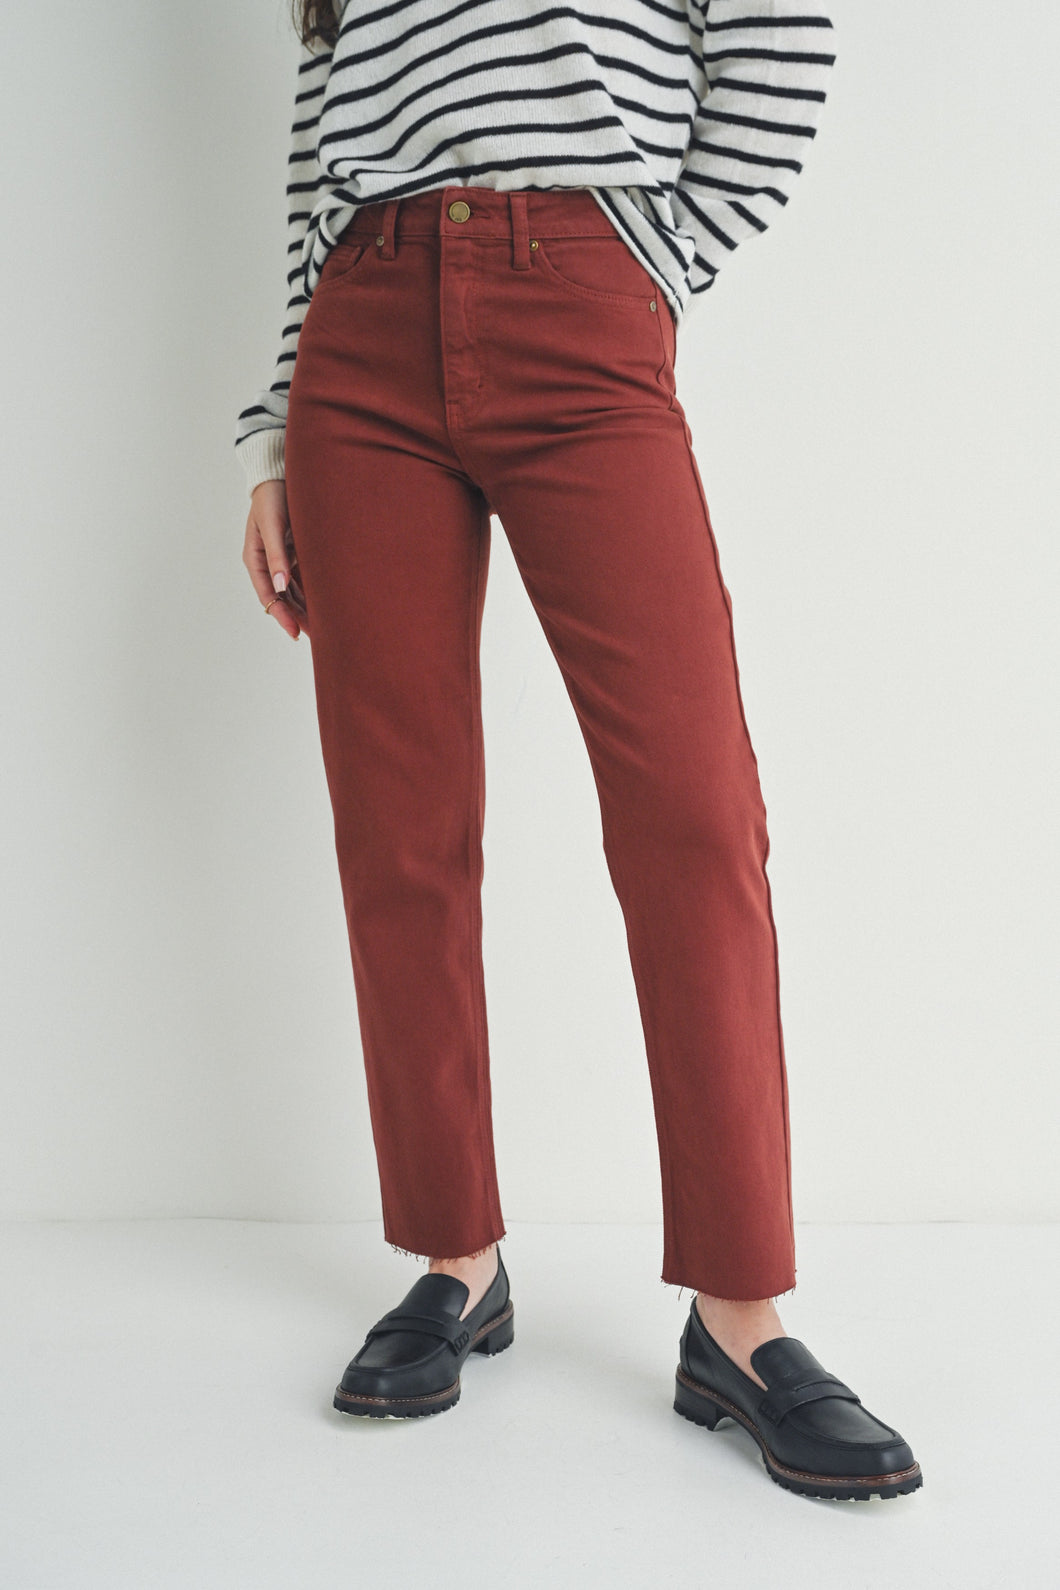 Evie Brick Red Jeans